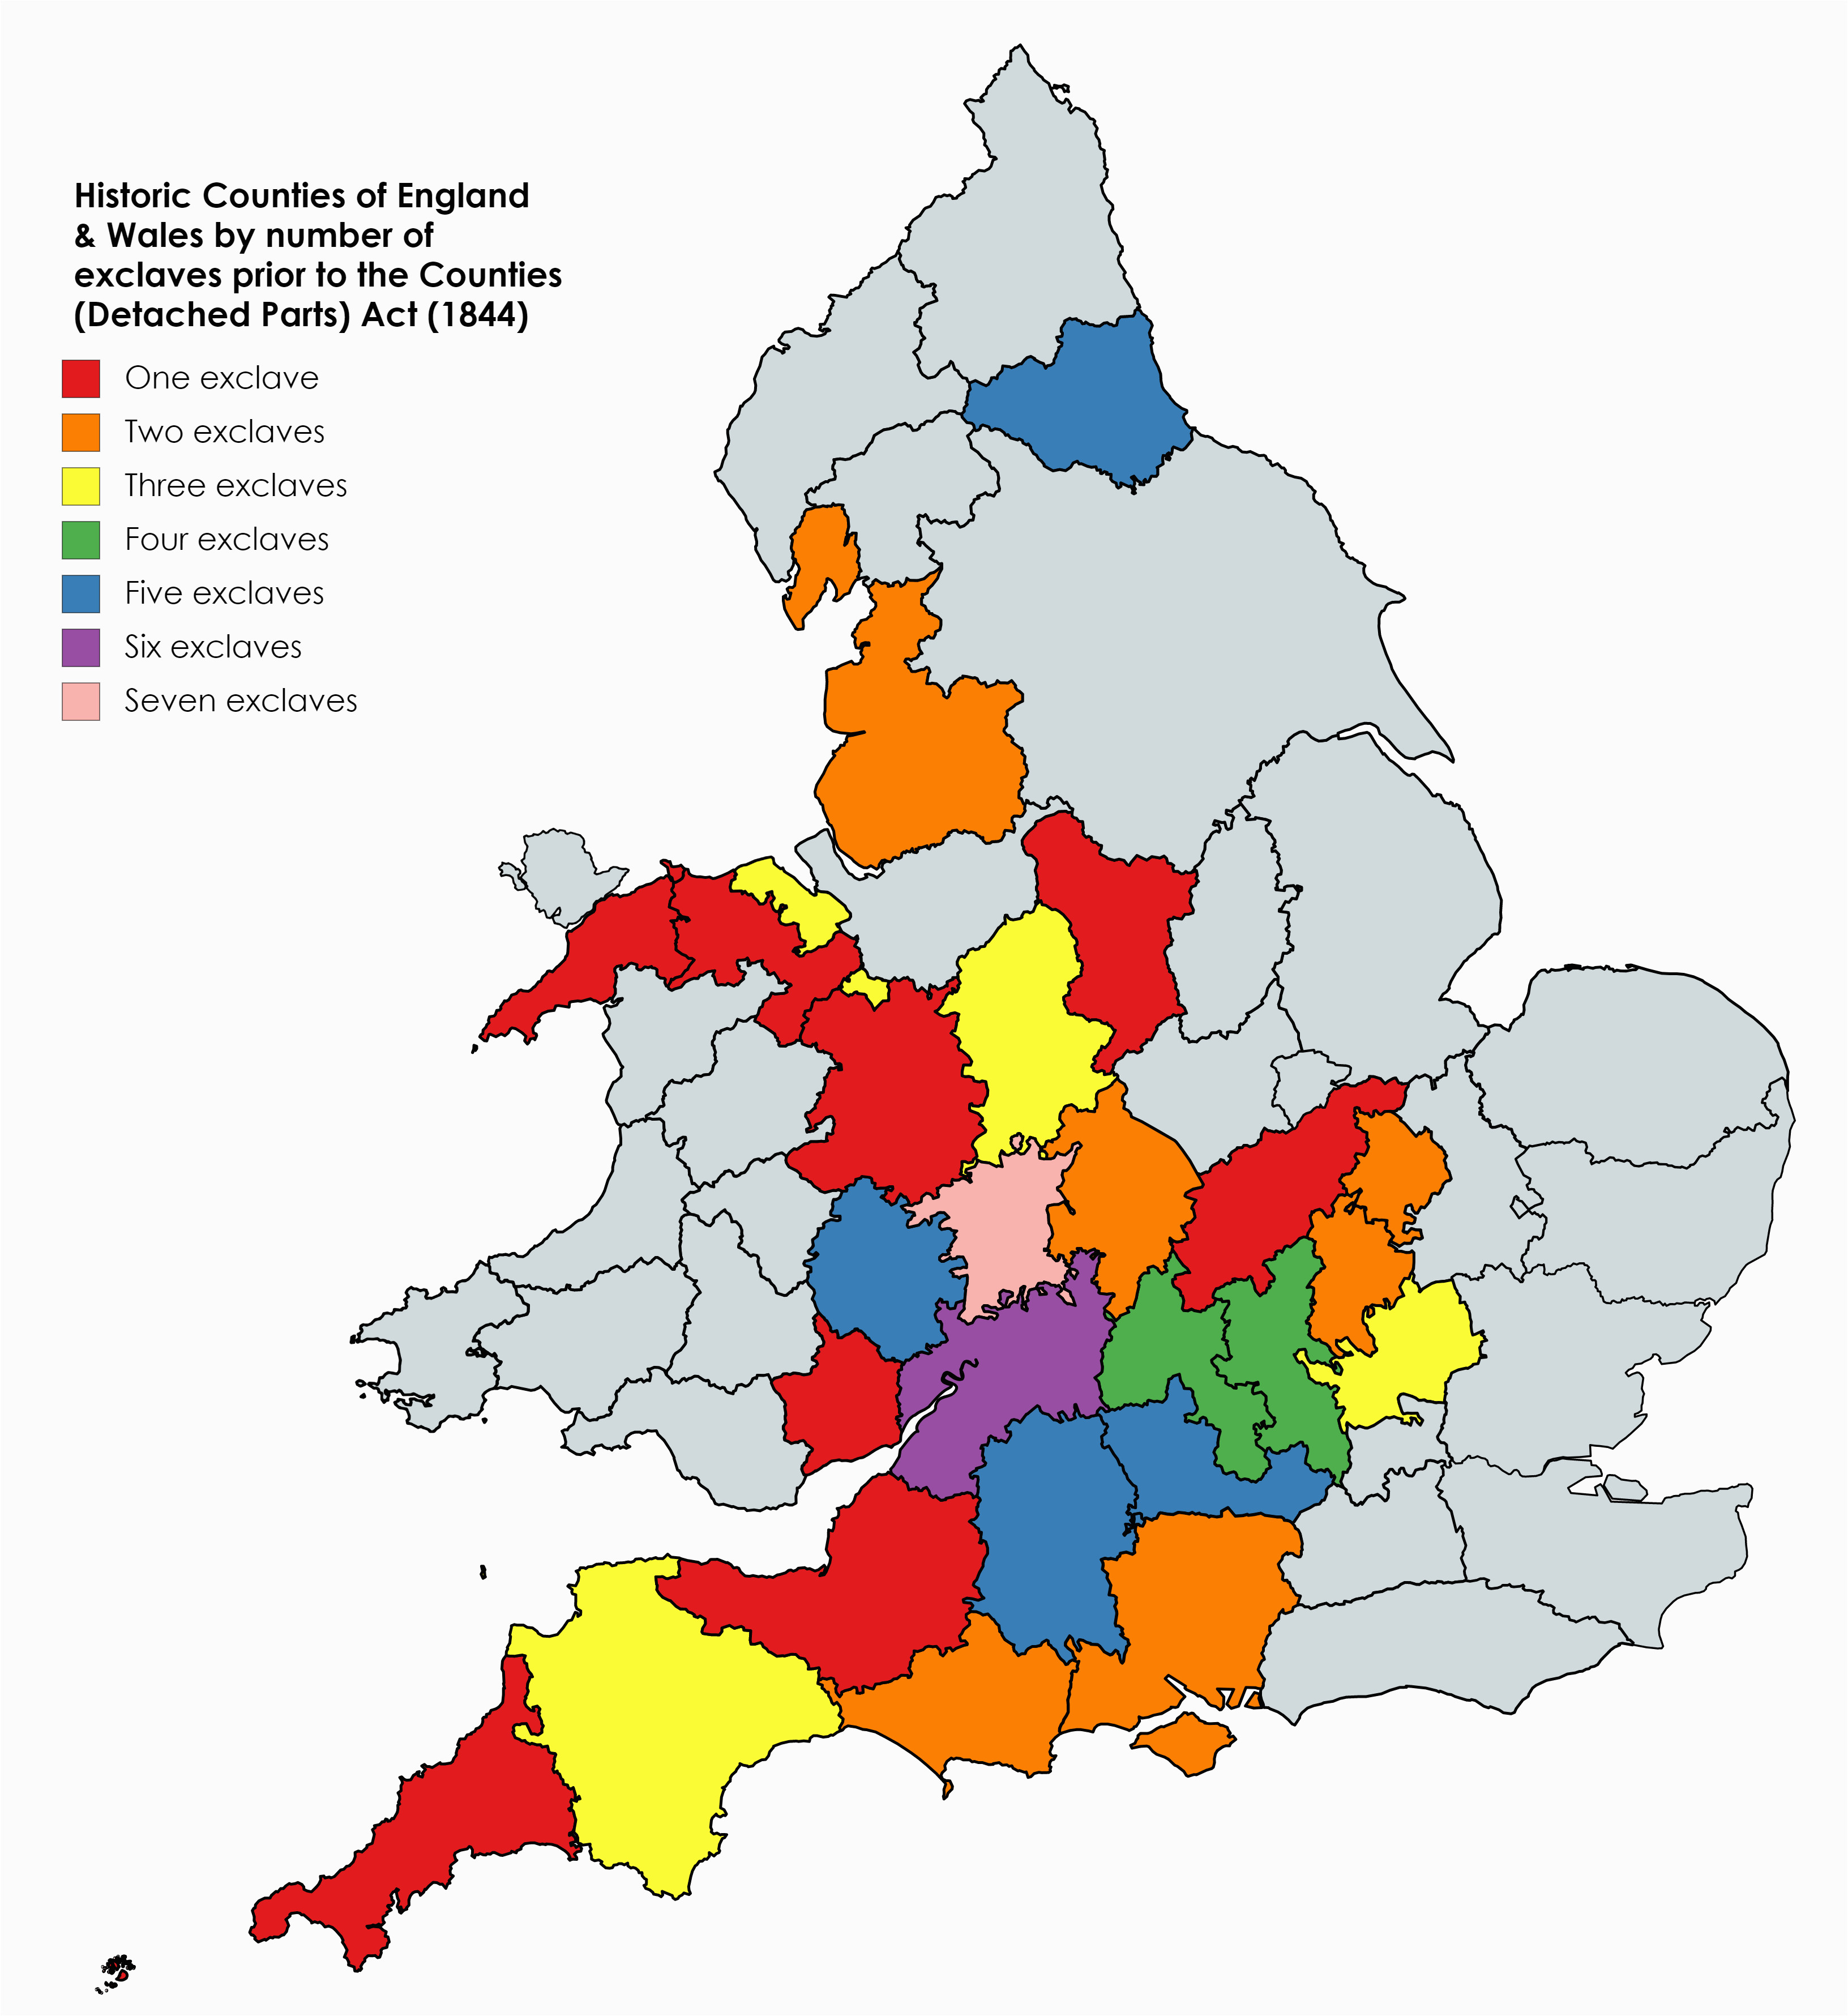 Regional Map Of England Historic Counties Of England Wales by Number Of Exclaves